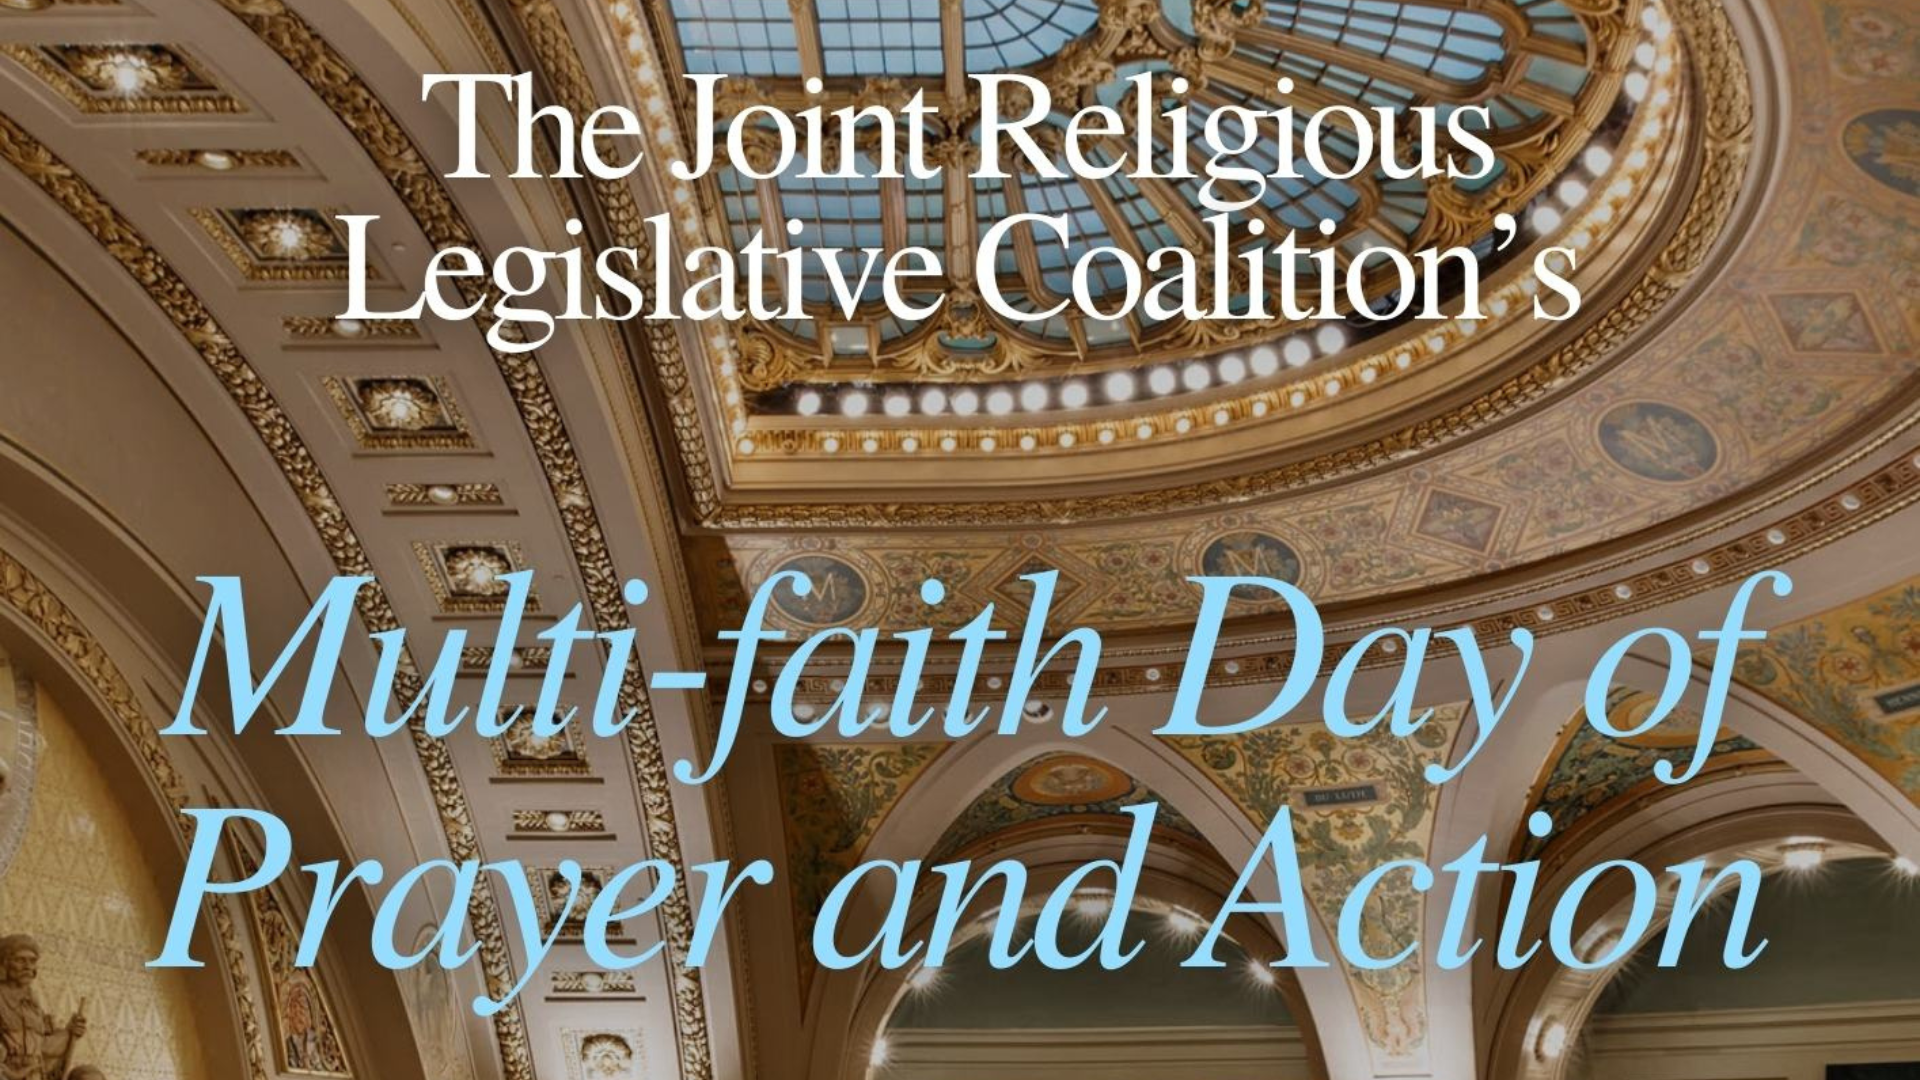 A Day of Prayer and Action